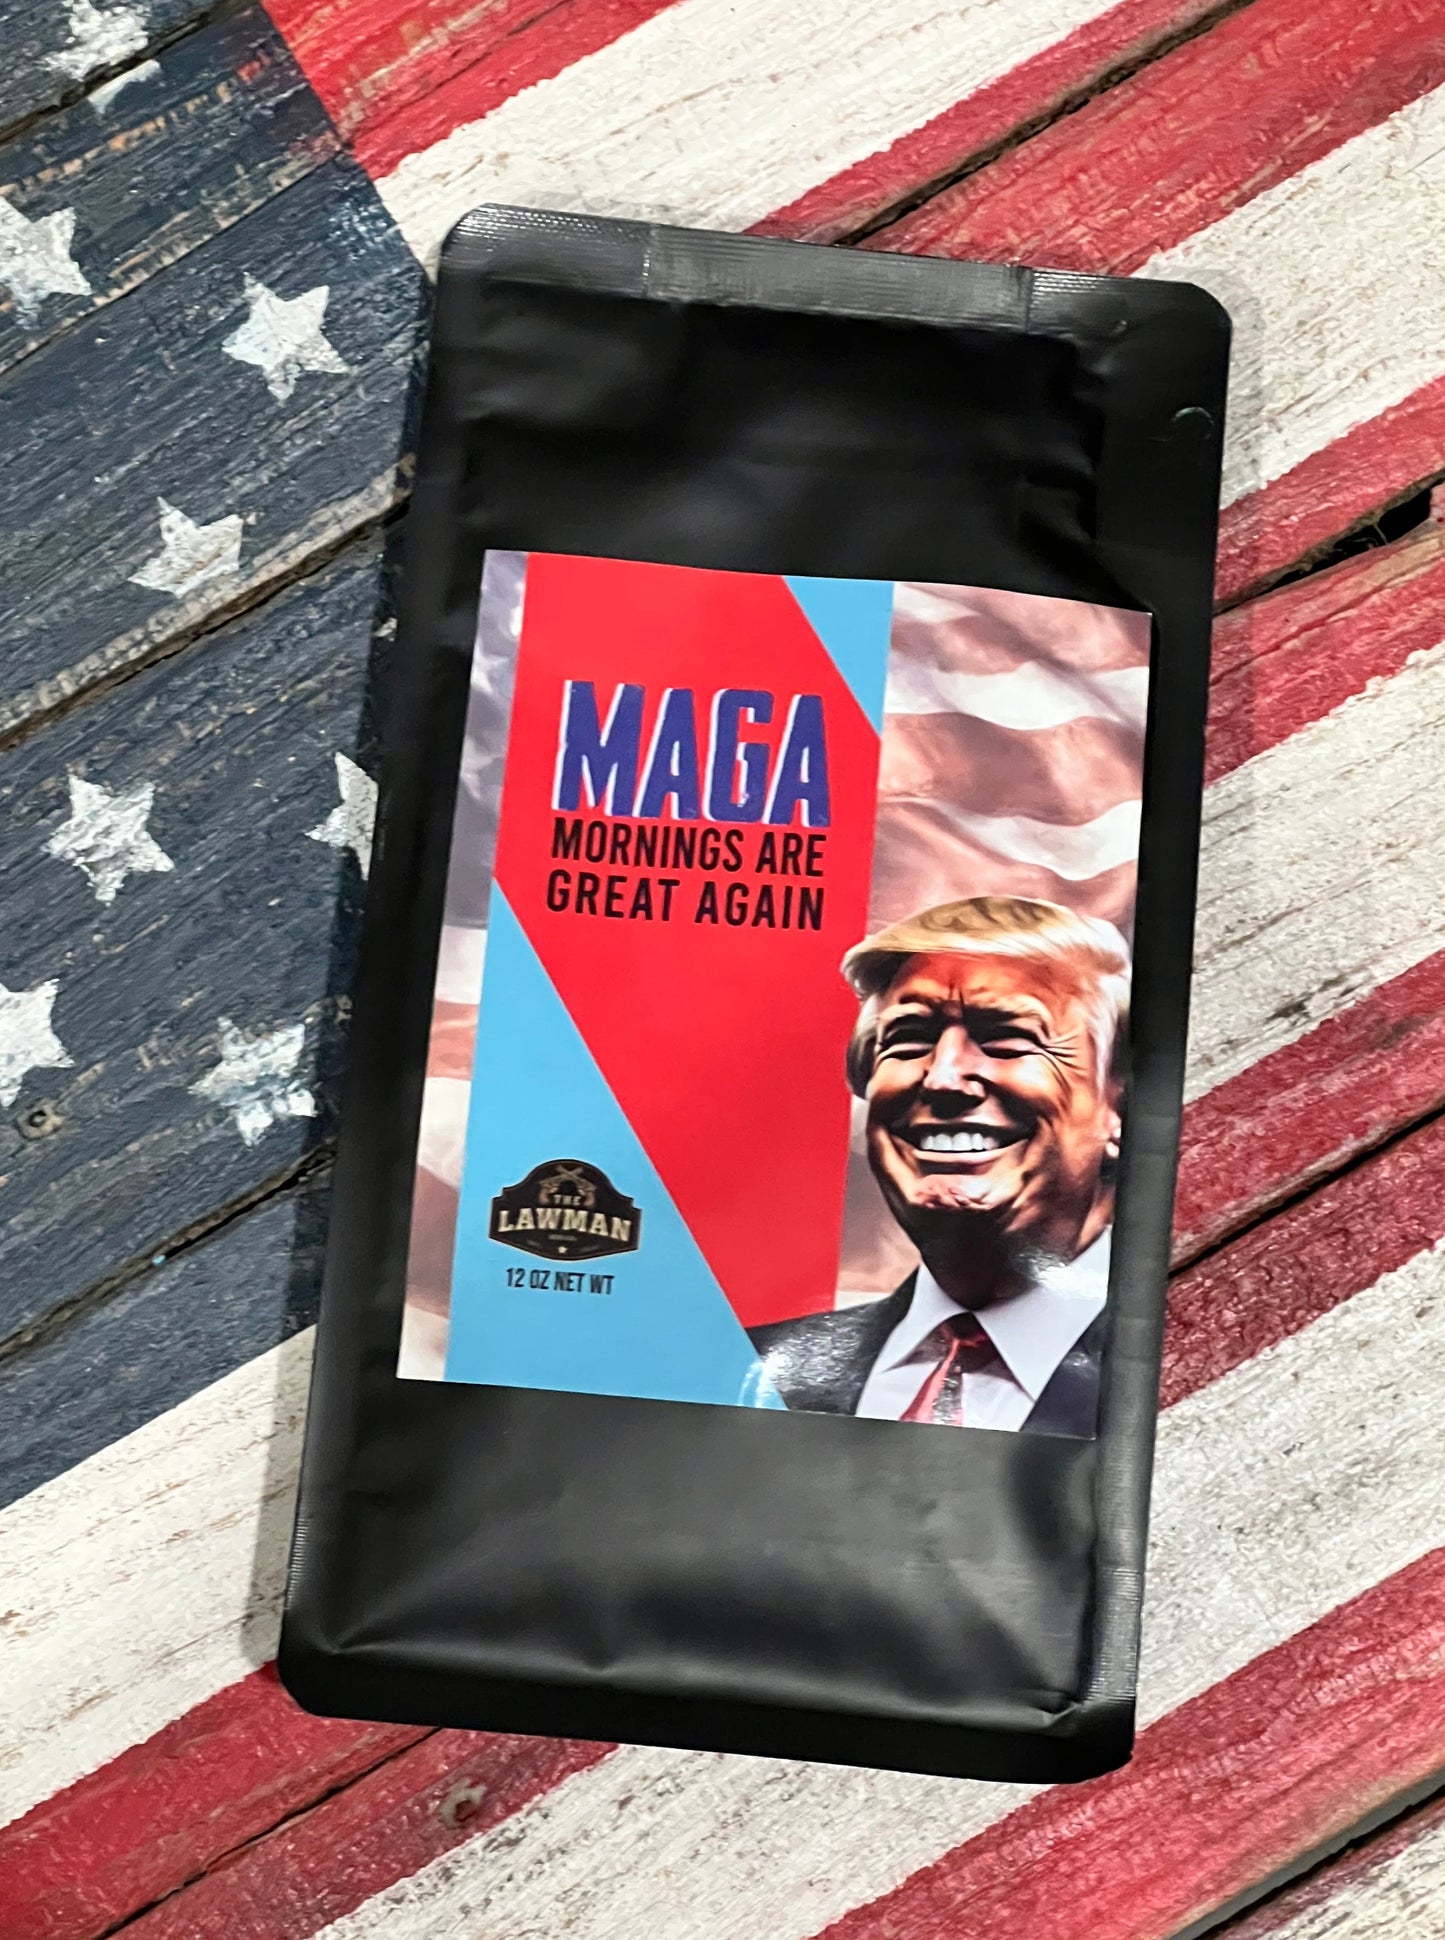 The Lawman "MAGA Blend" Mornings Are Great Again !